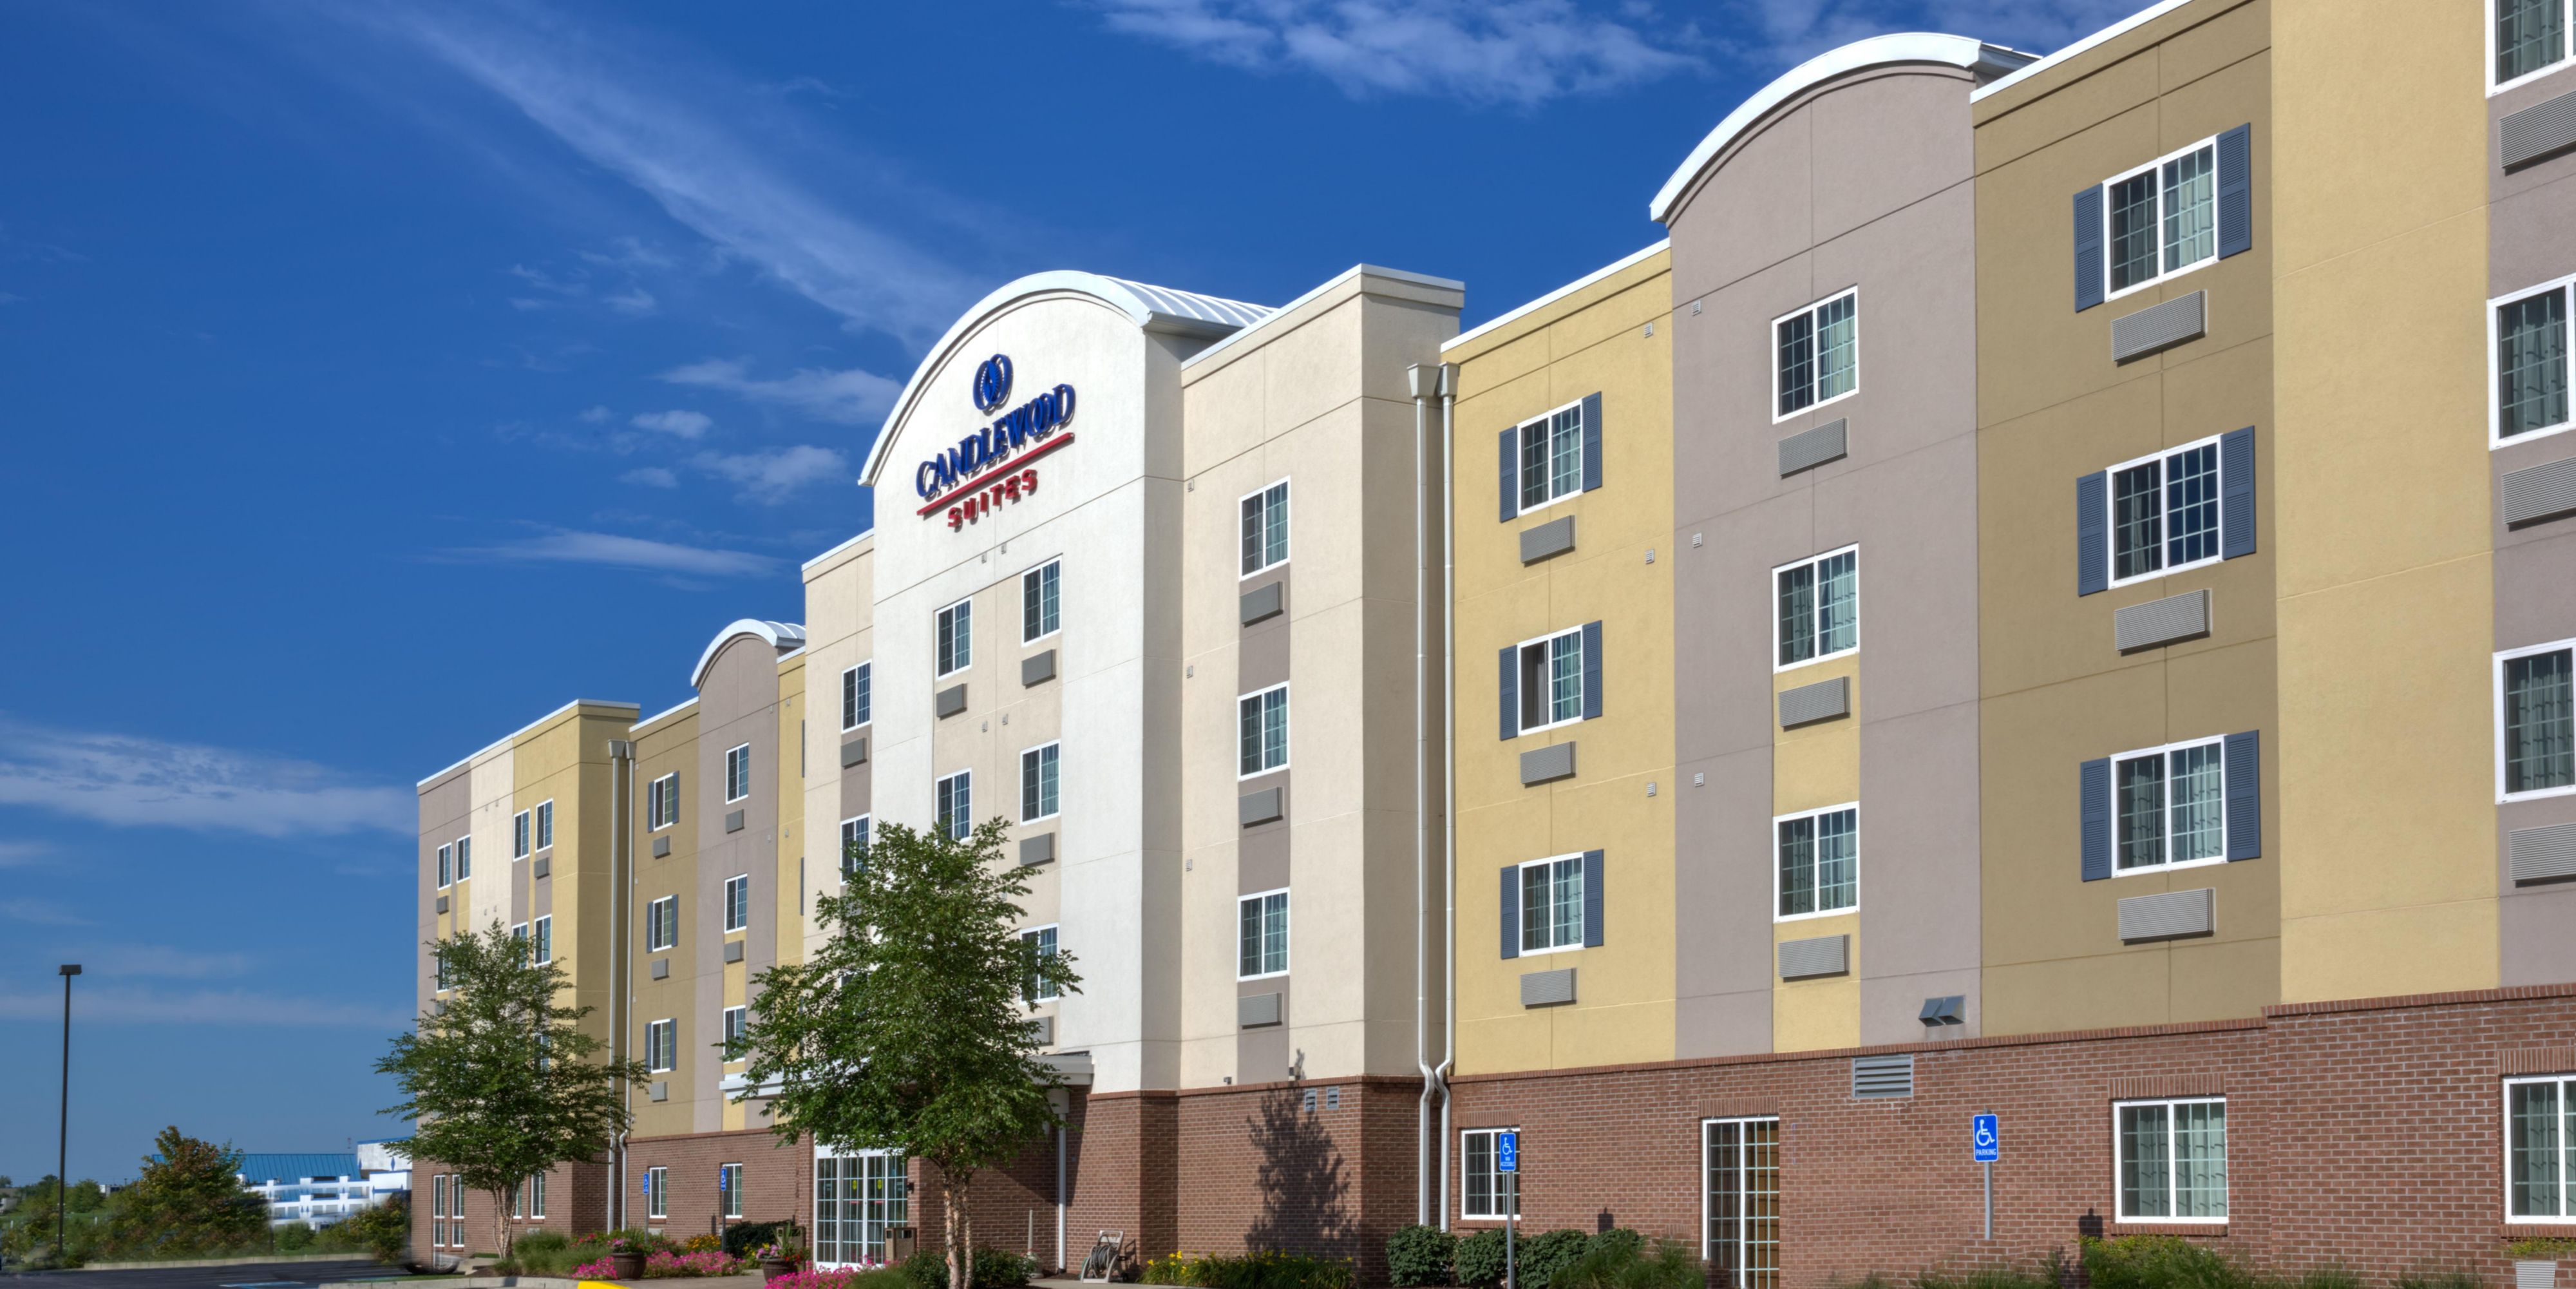 Candlewood Suites Indianapolis 4413320426 2x1